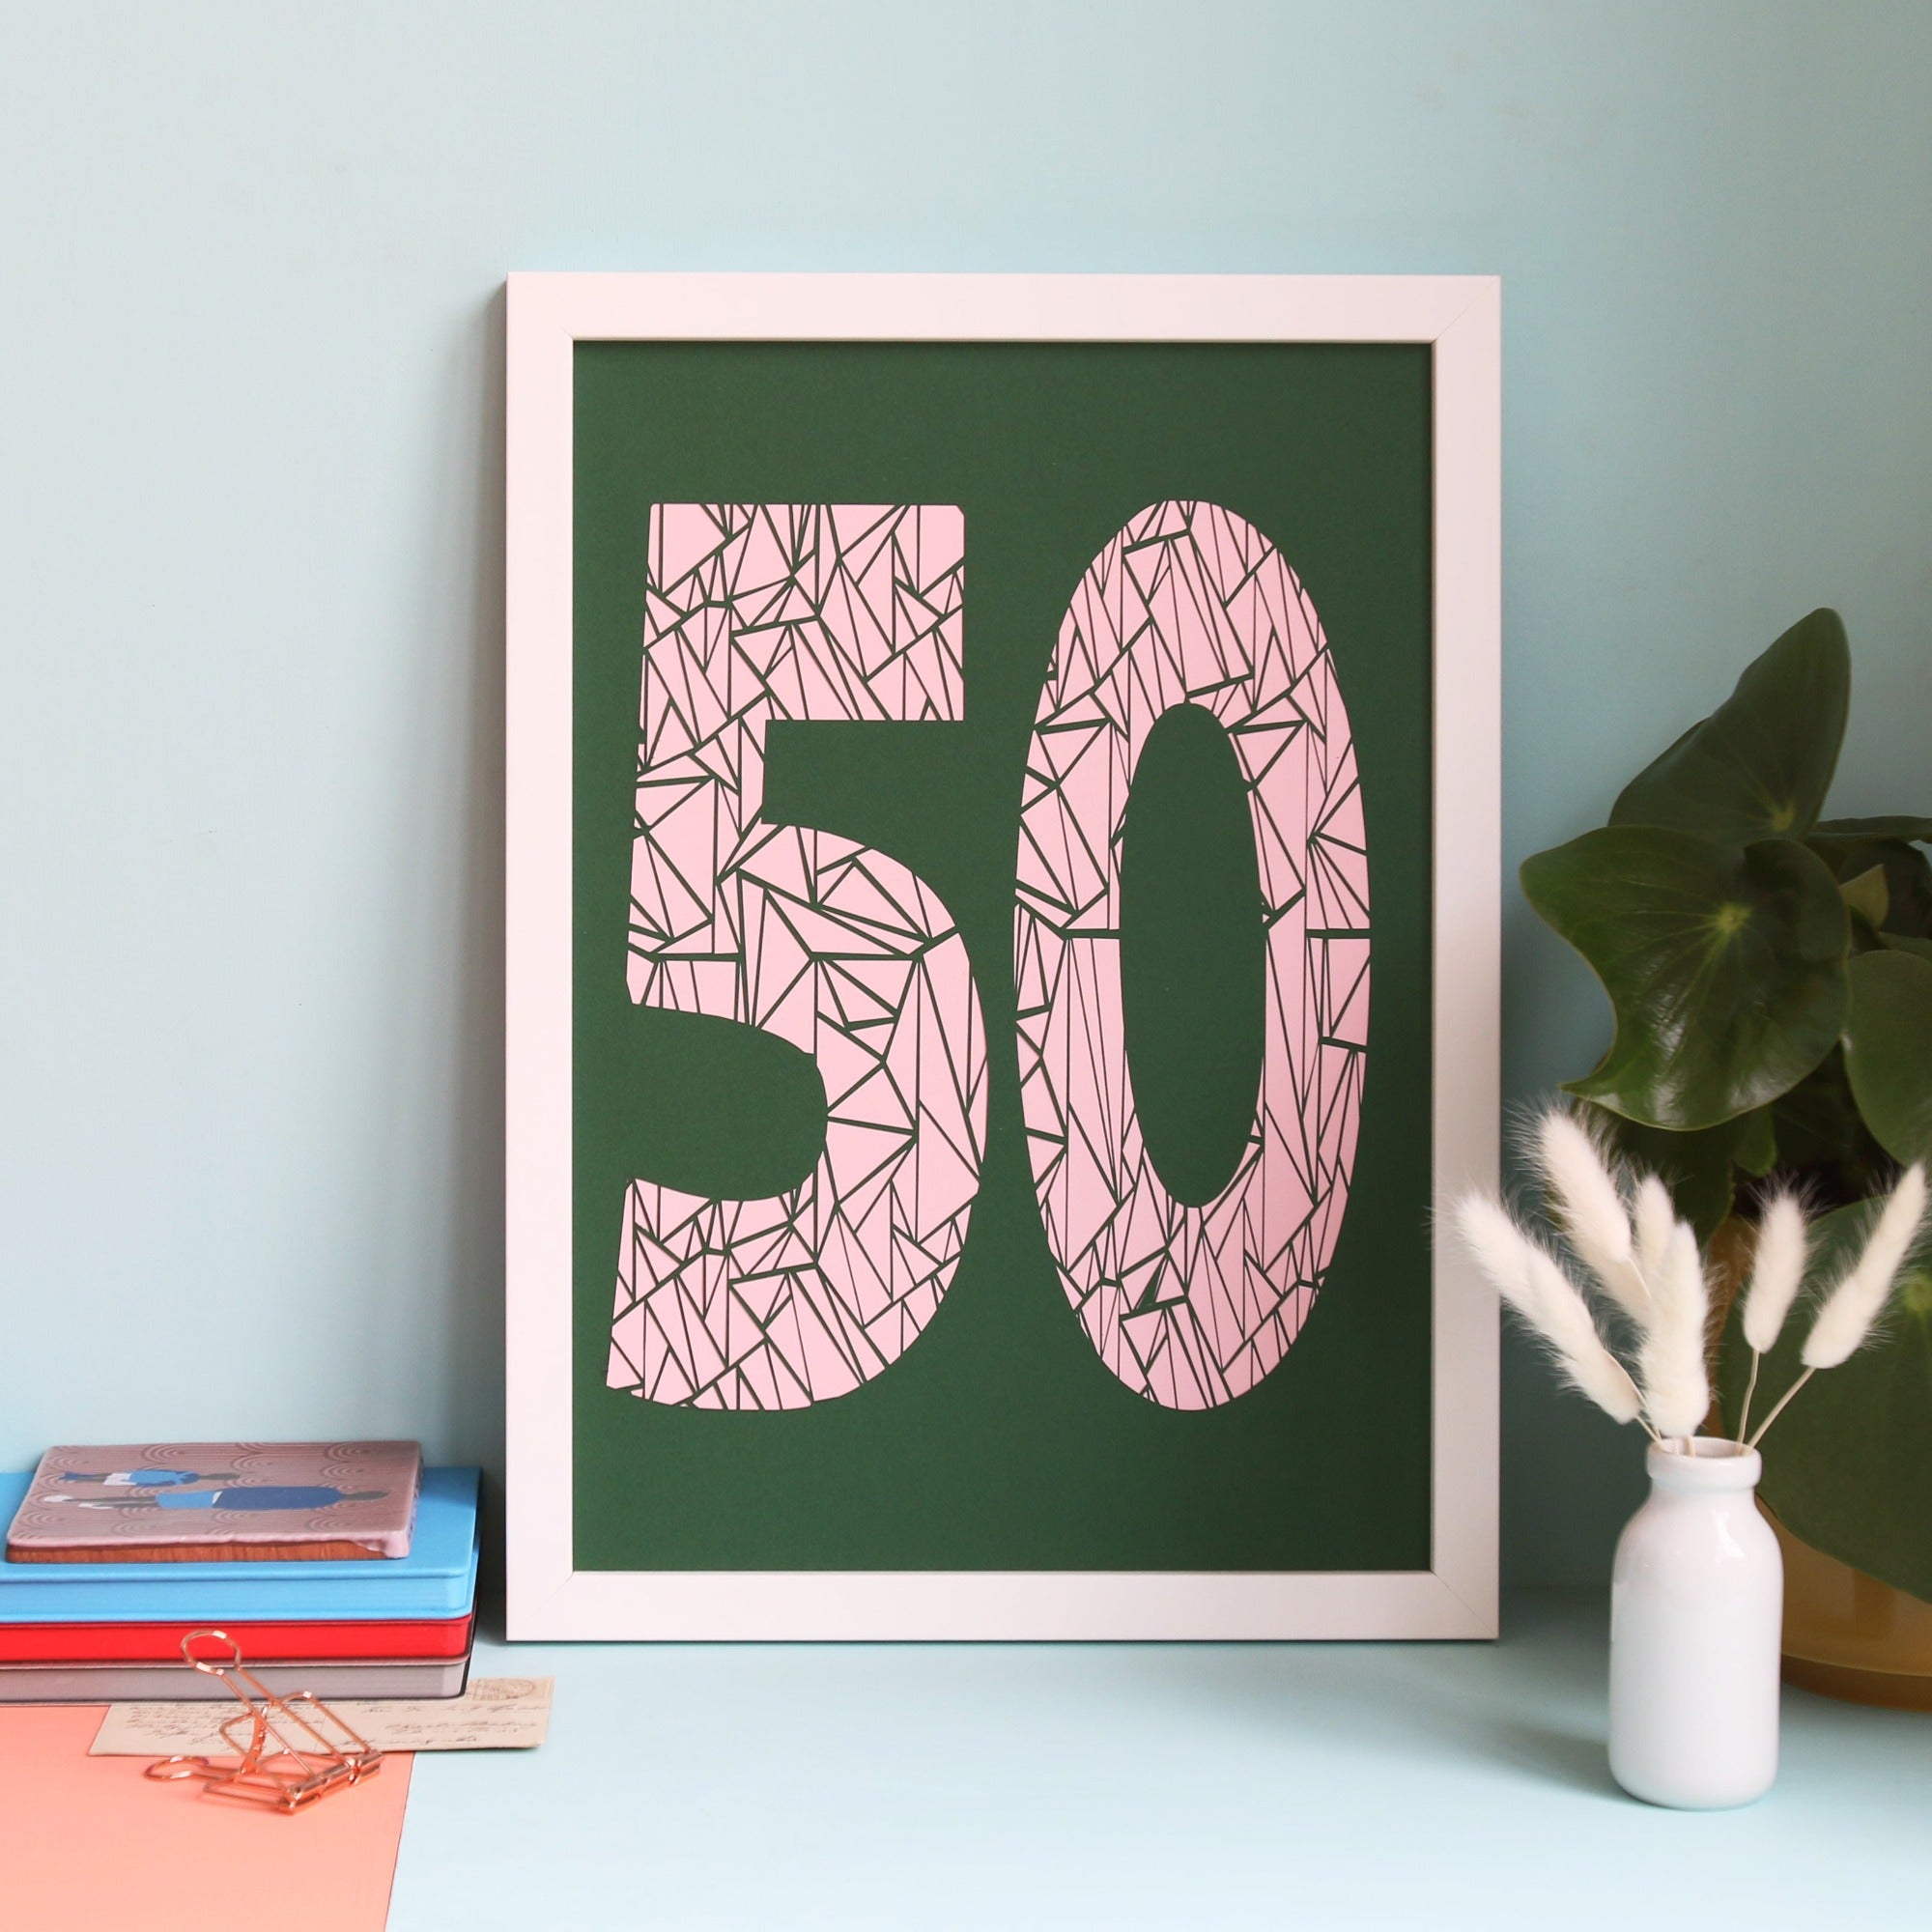 Framed geometric number 50 papercut in green and pink colourways